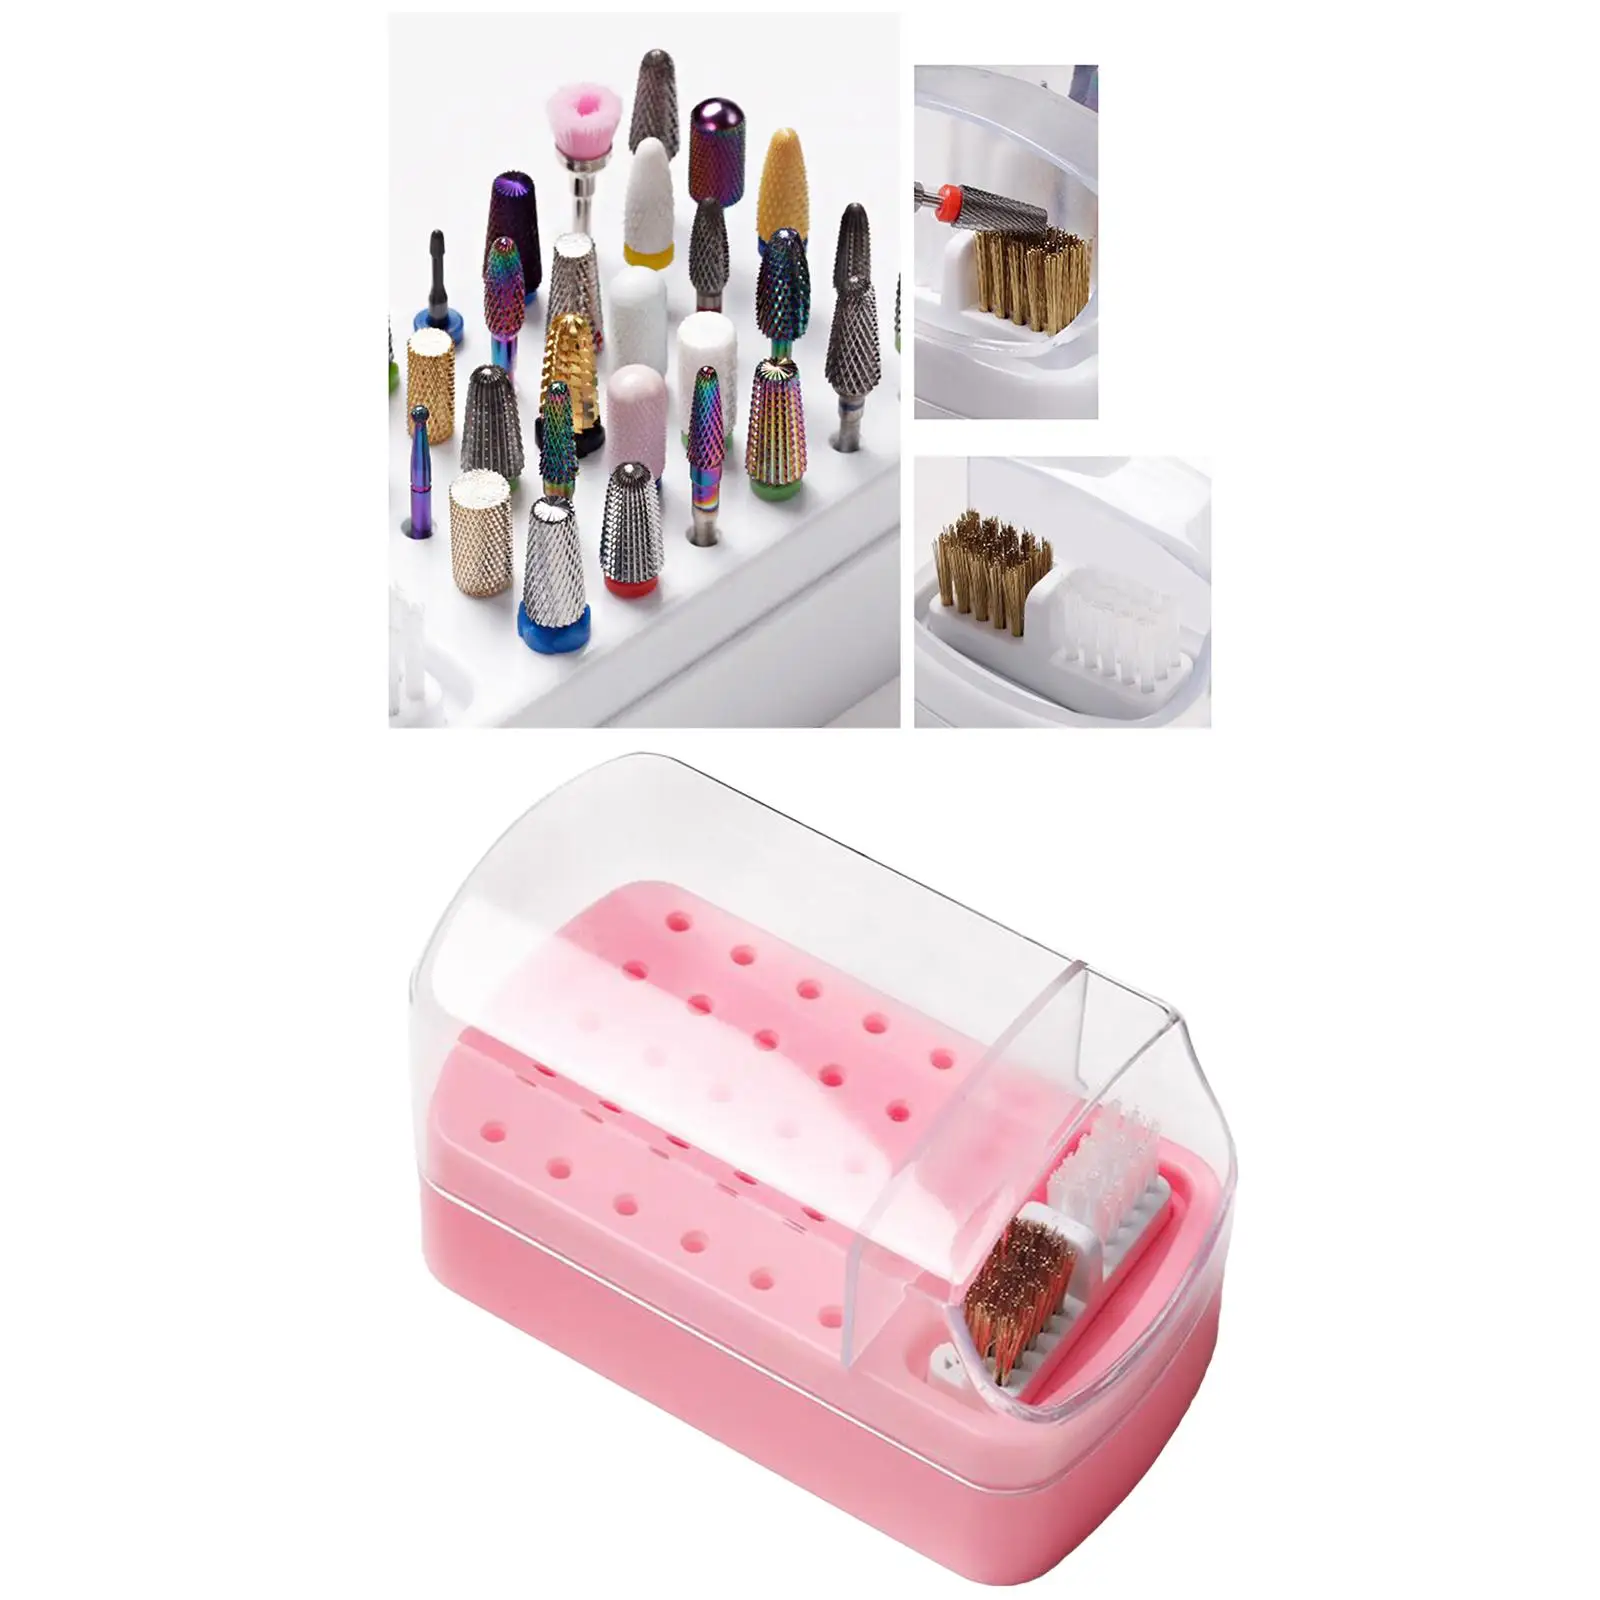 30 Slots Nail Drill Bit Holder Grinding Case Waterproof Container Manicure